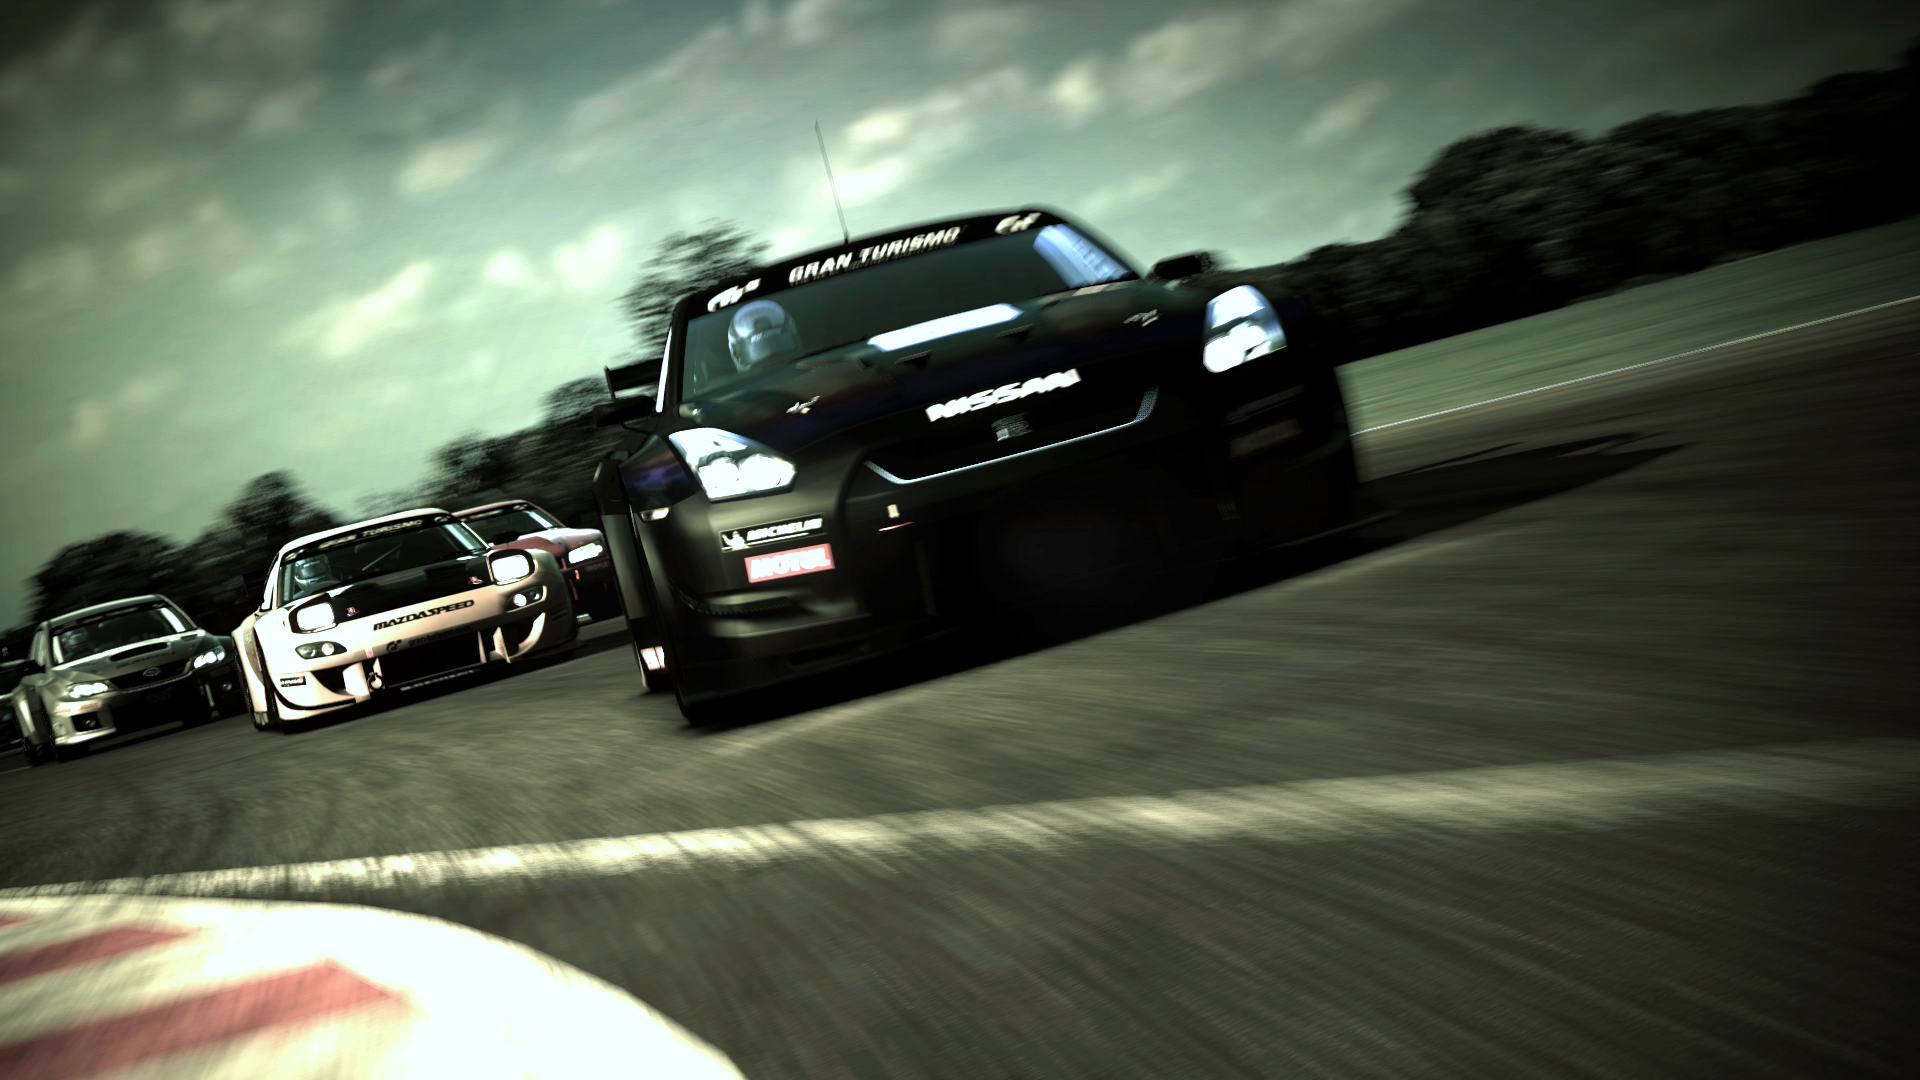 Forza Motorsport Should Be Feeling The Pressure After New Gran Turismo 7  Update